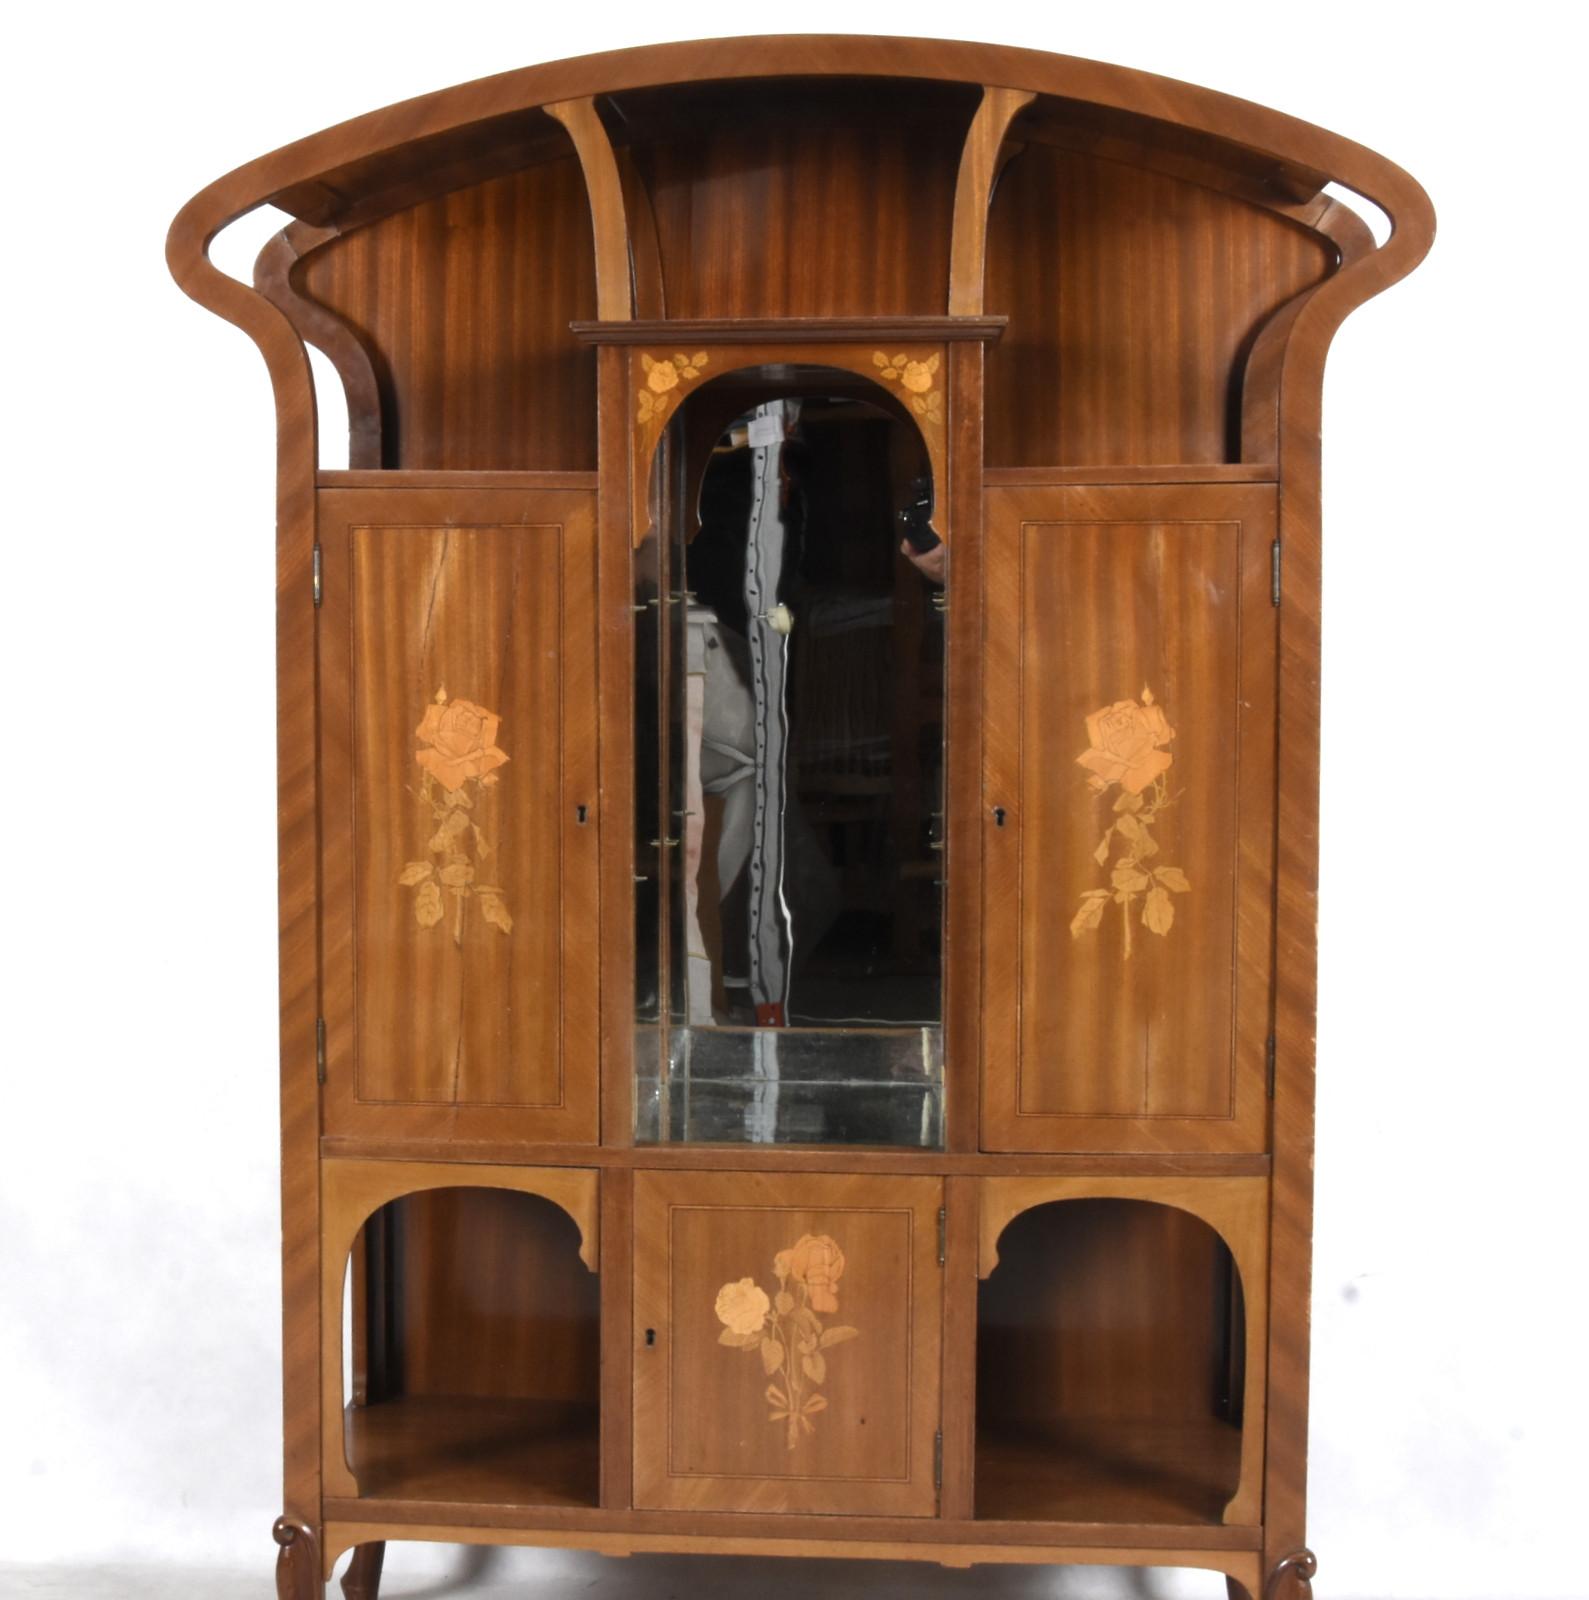 Fantastic display and storage cabinet constructed around the turn of the century in France. Beautiful Art Nouveau lines crown this showcase. Constructed in Mahogany, intarsia floral inlays adorn the facepieces. All hardware and glass are original